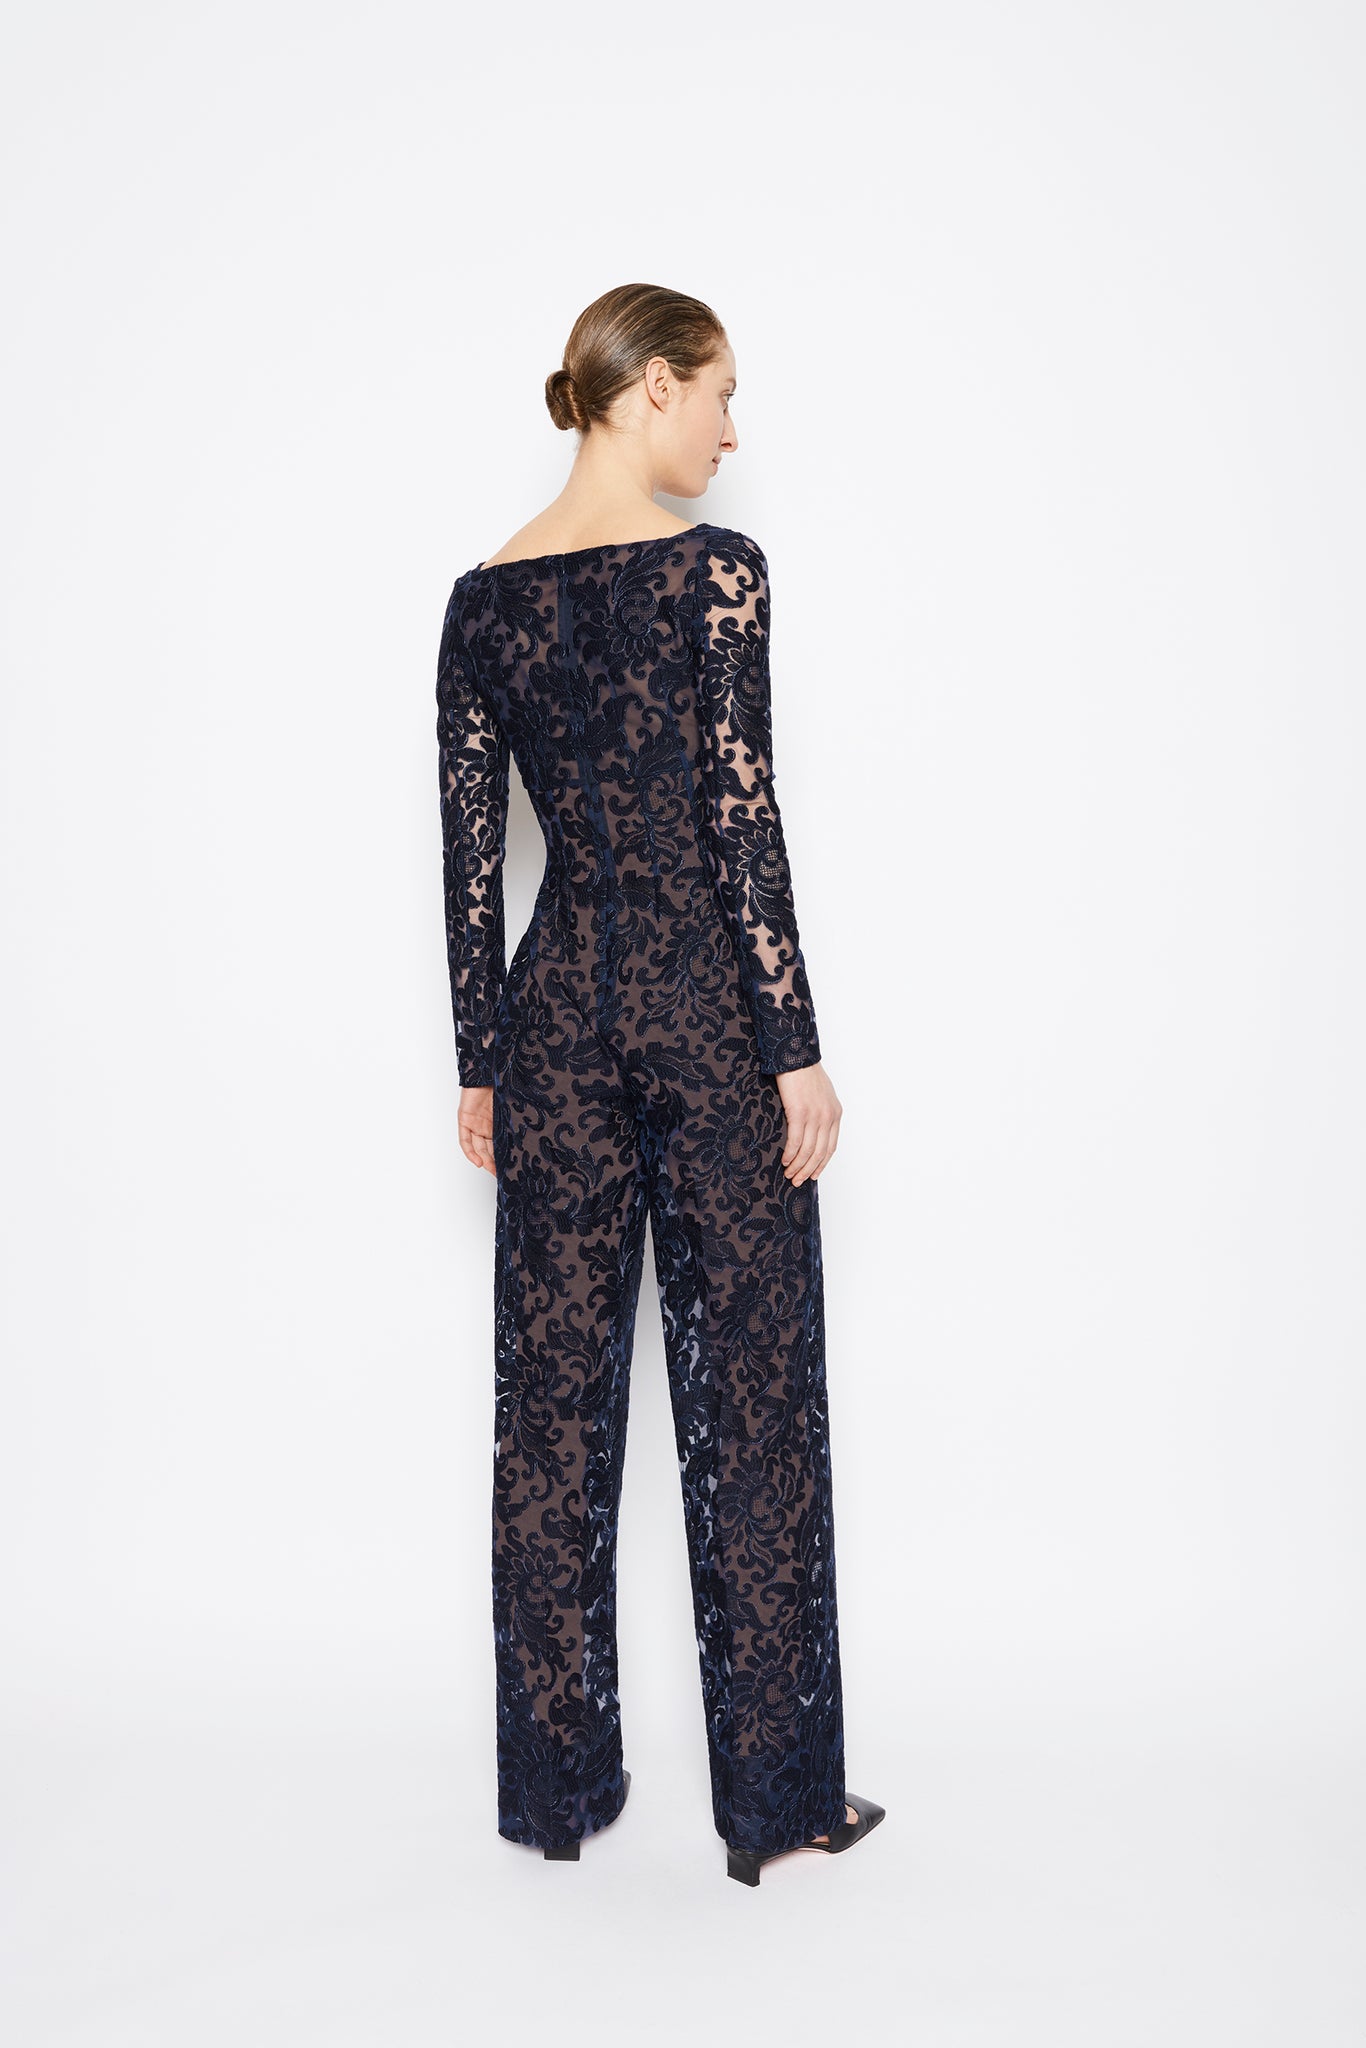 Raelynn Embroidered Lace Jumpsuit Navy Blue 